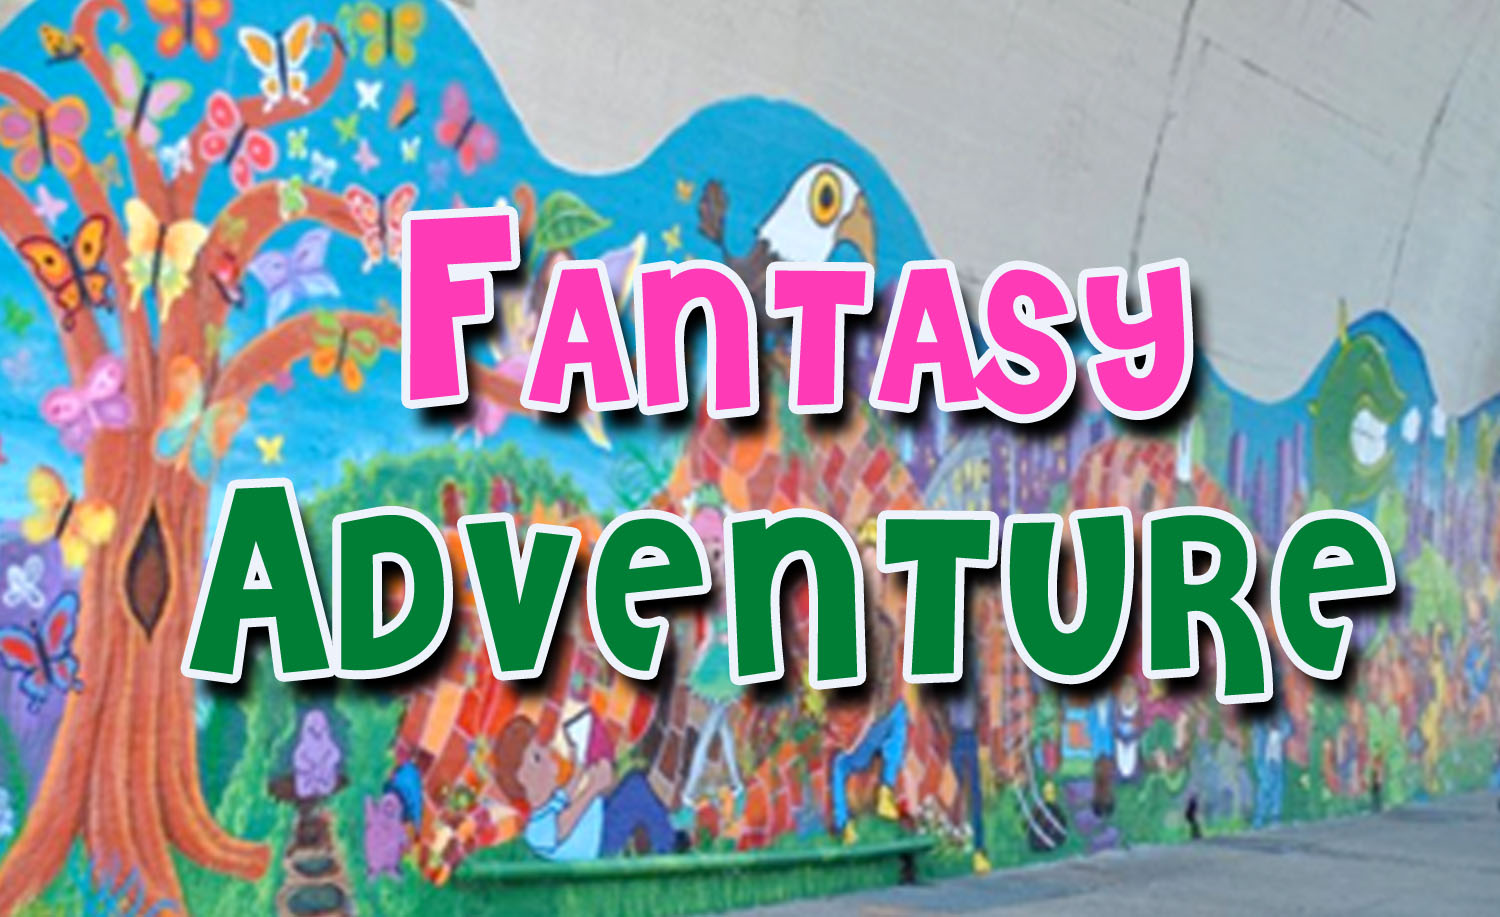 text fantasy adventure is in front of a hand painted mural with creatures